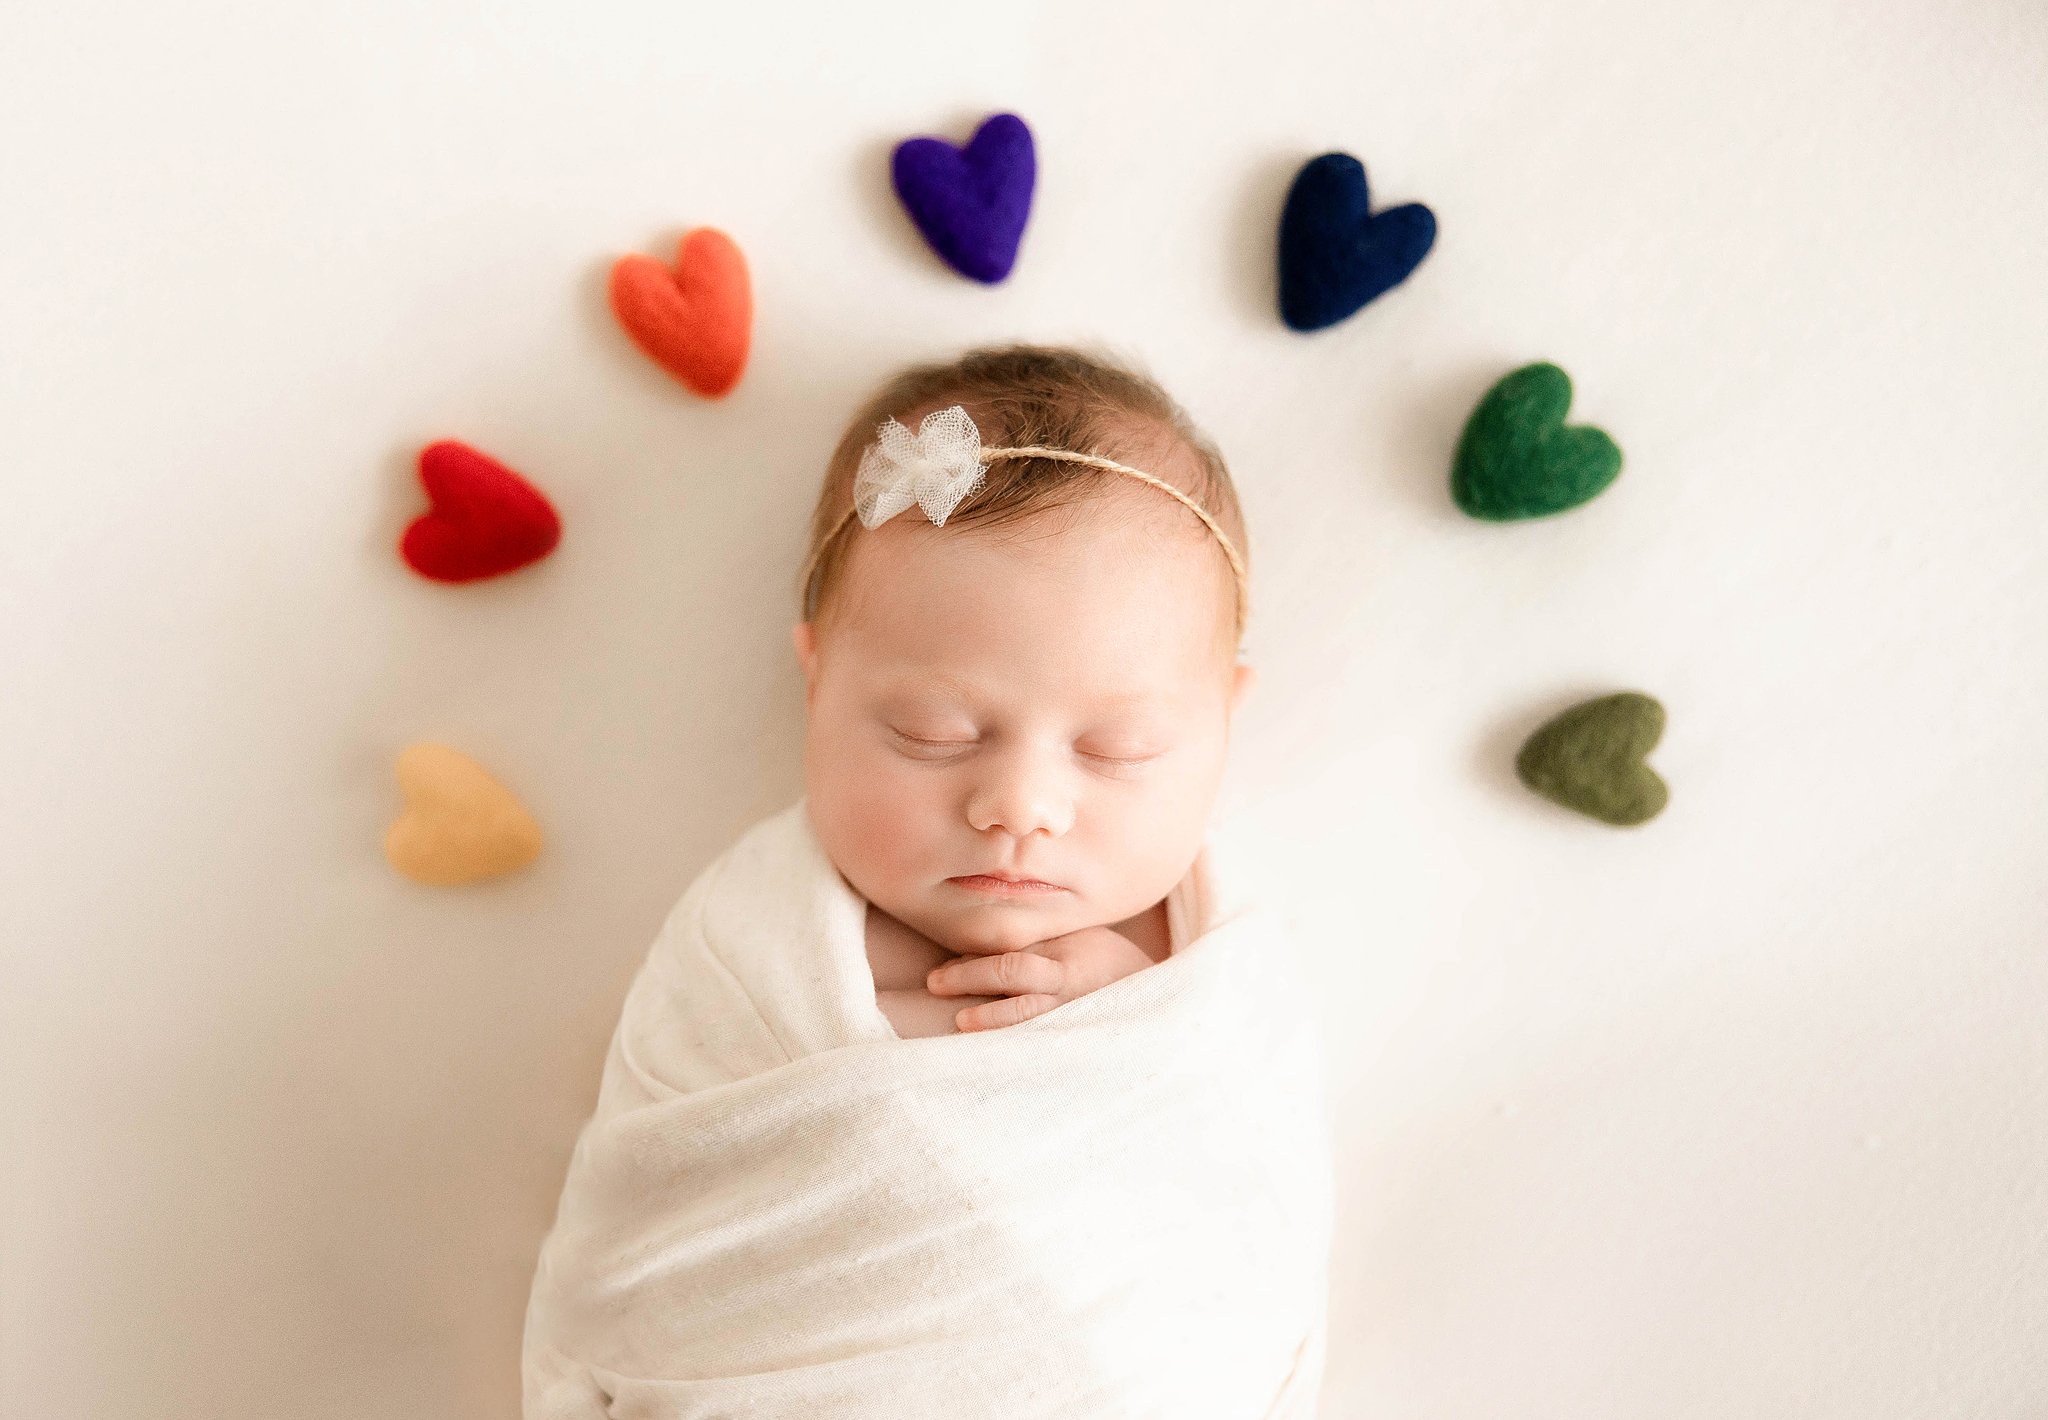 what age should newborn photos be taken at?